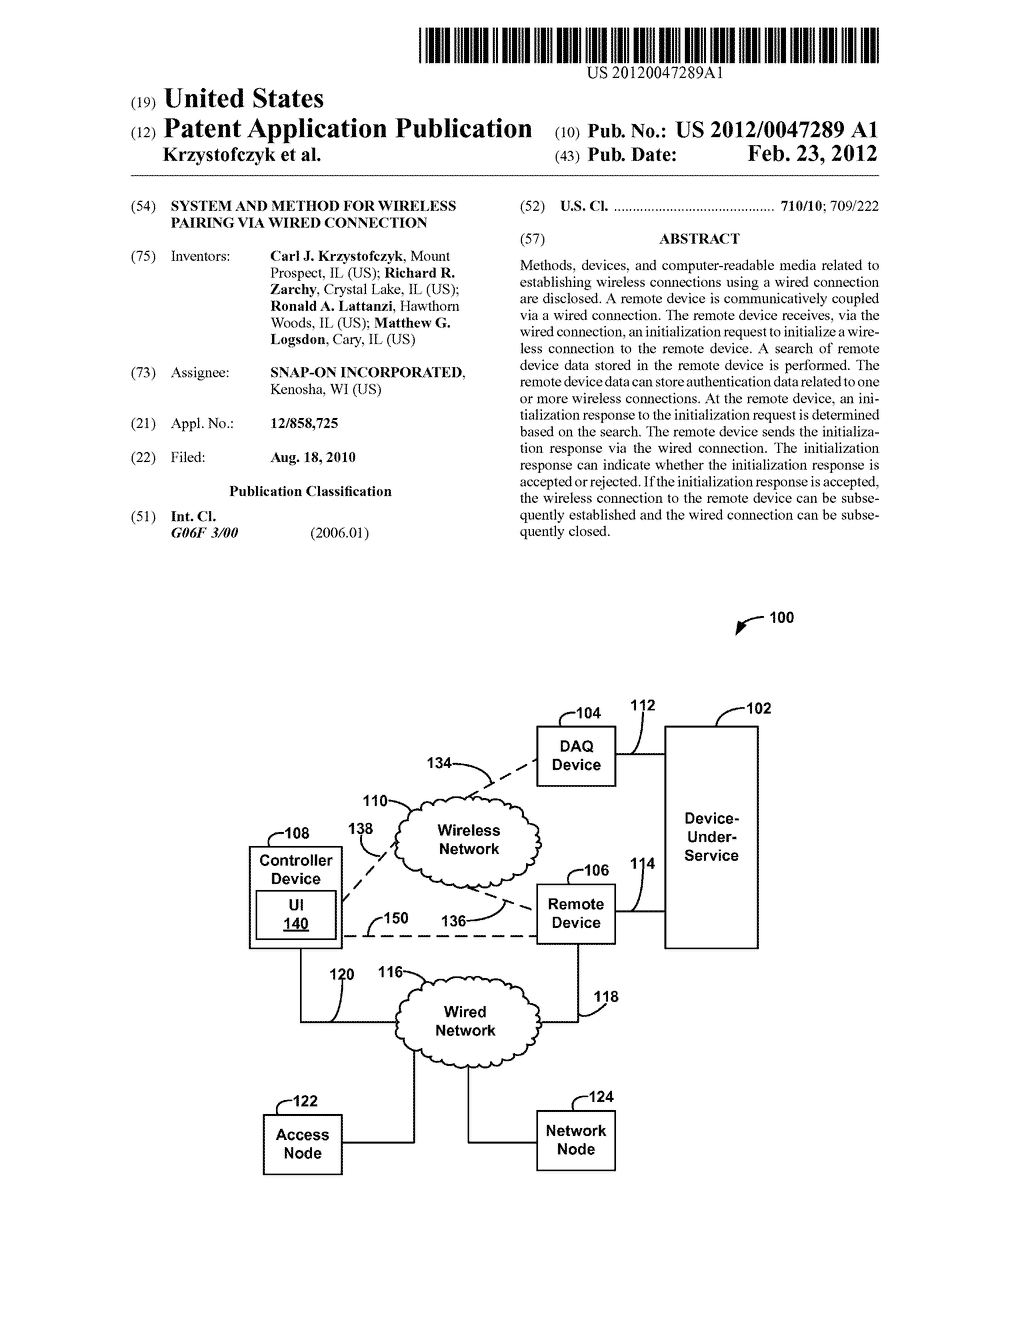 System and Method for Wireless Pairing via Wired Connection - diagram, schematic, and image 01